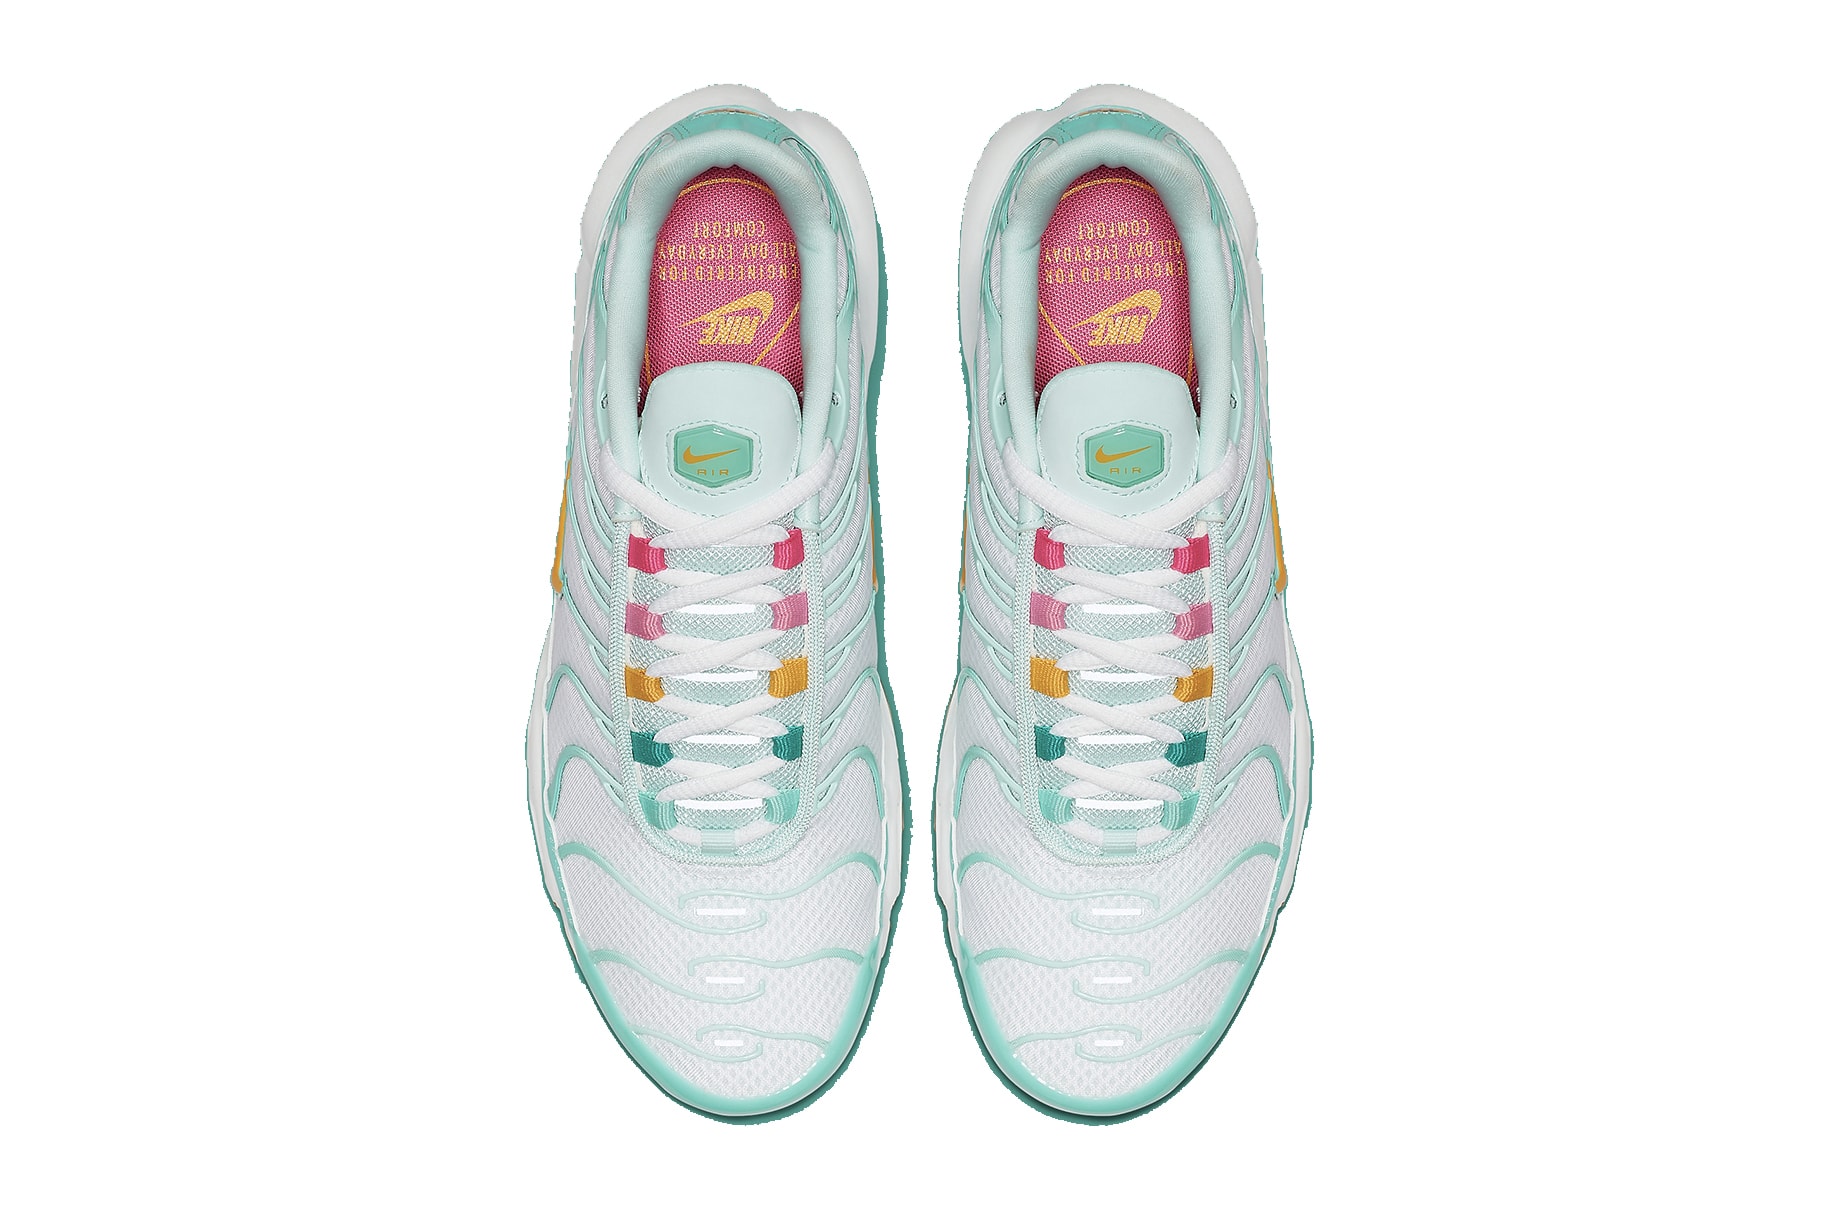 Nike Air Max Plus "Easter" Spring/Summer Release White Blue Turquoise Gold